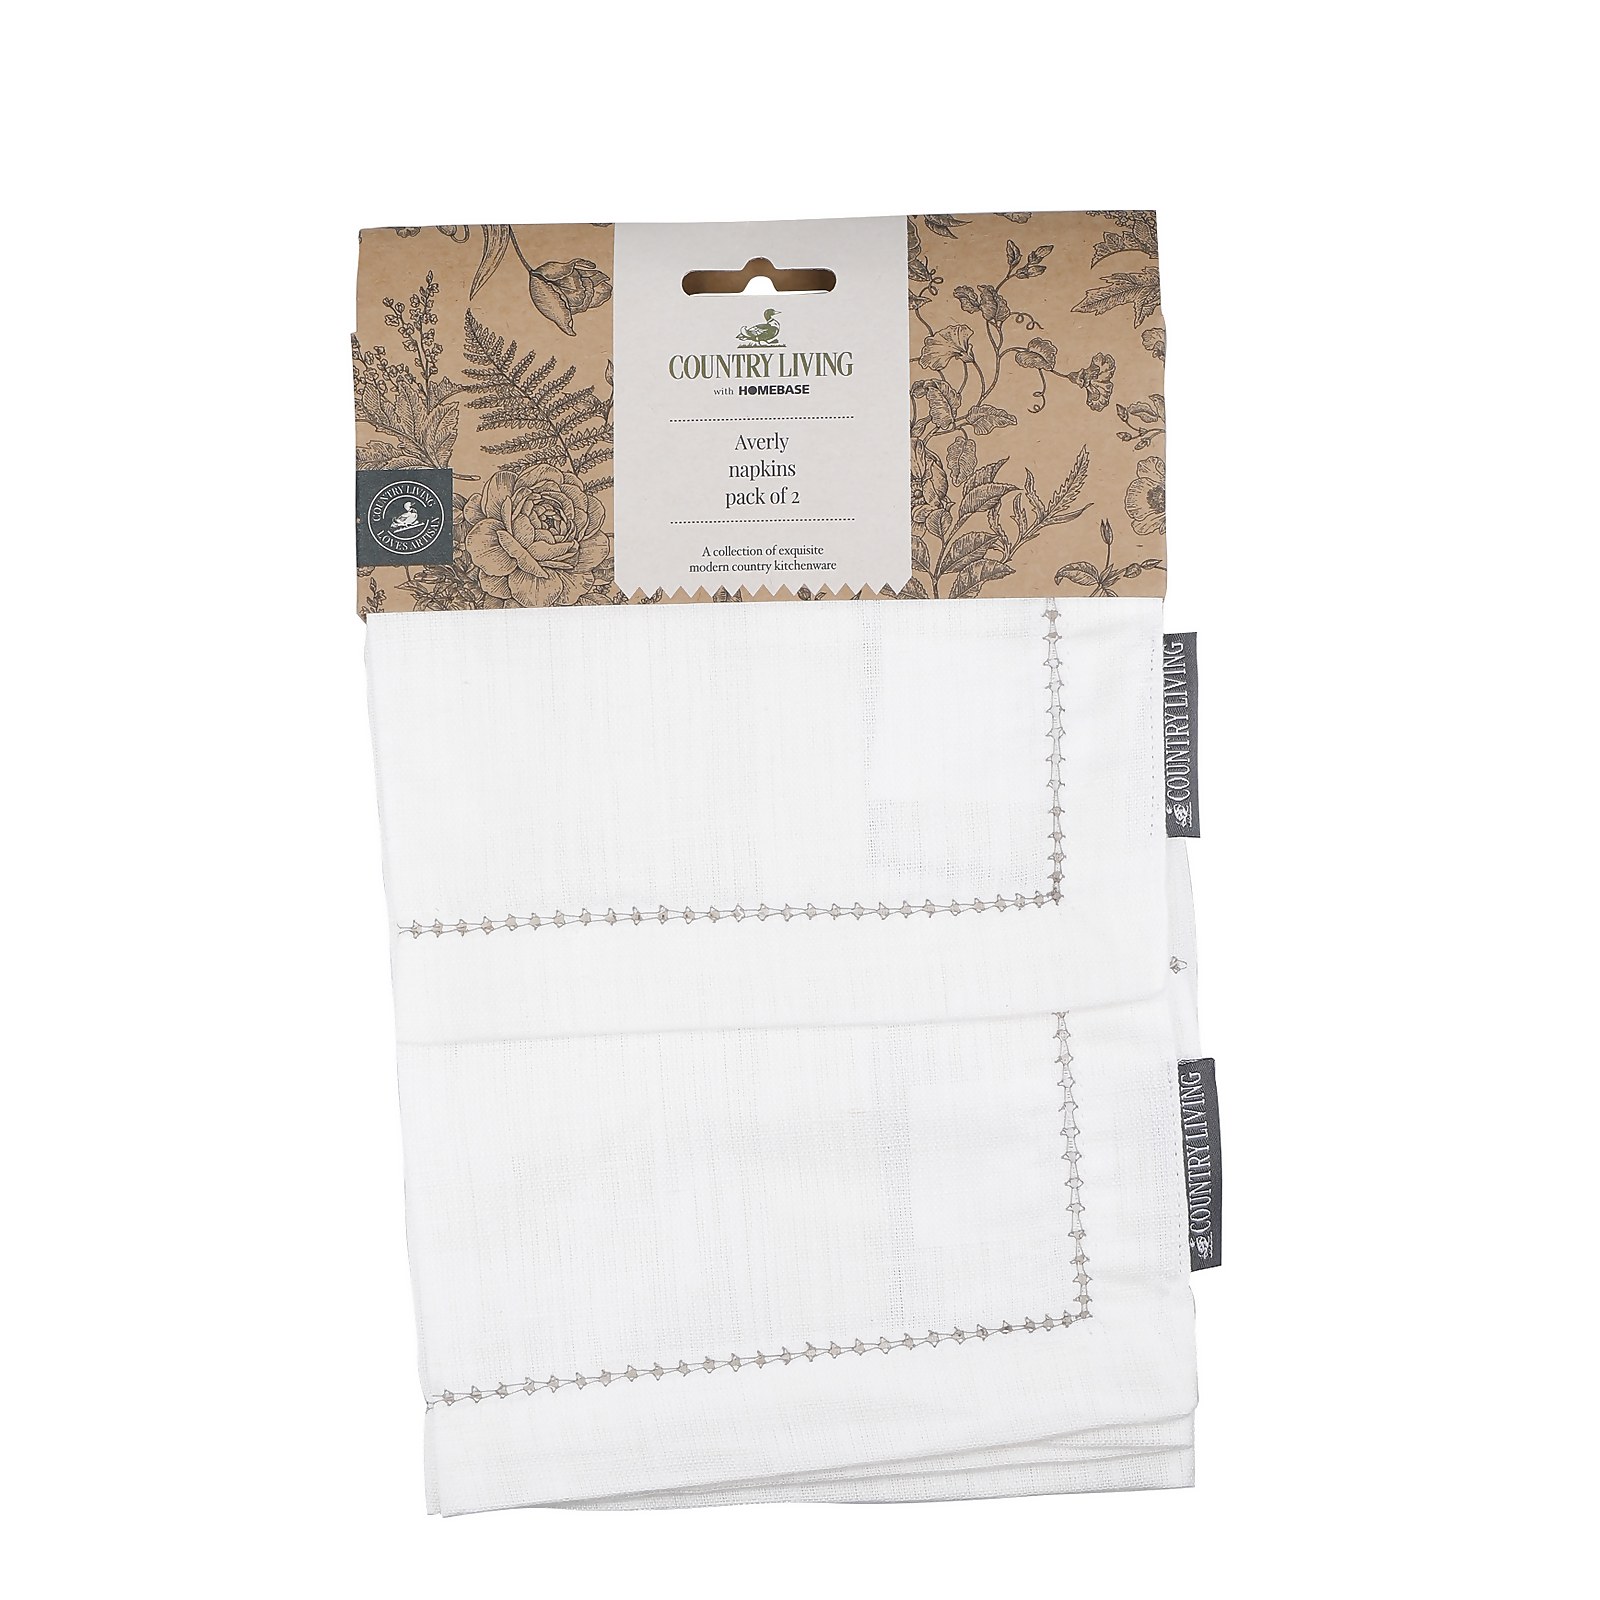 Photo of Country Living Averly Linen Blend Napkins - 2 Pack - White & Grey